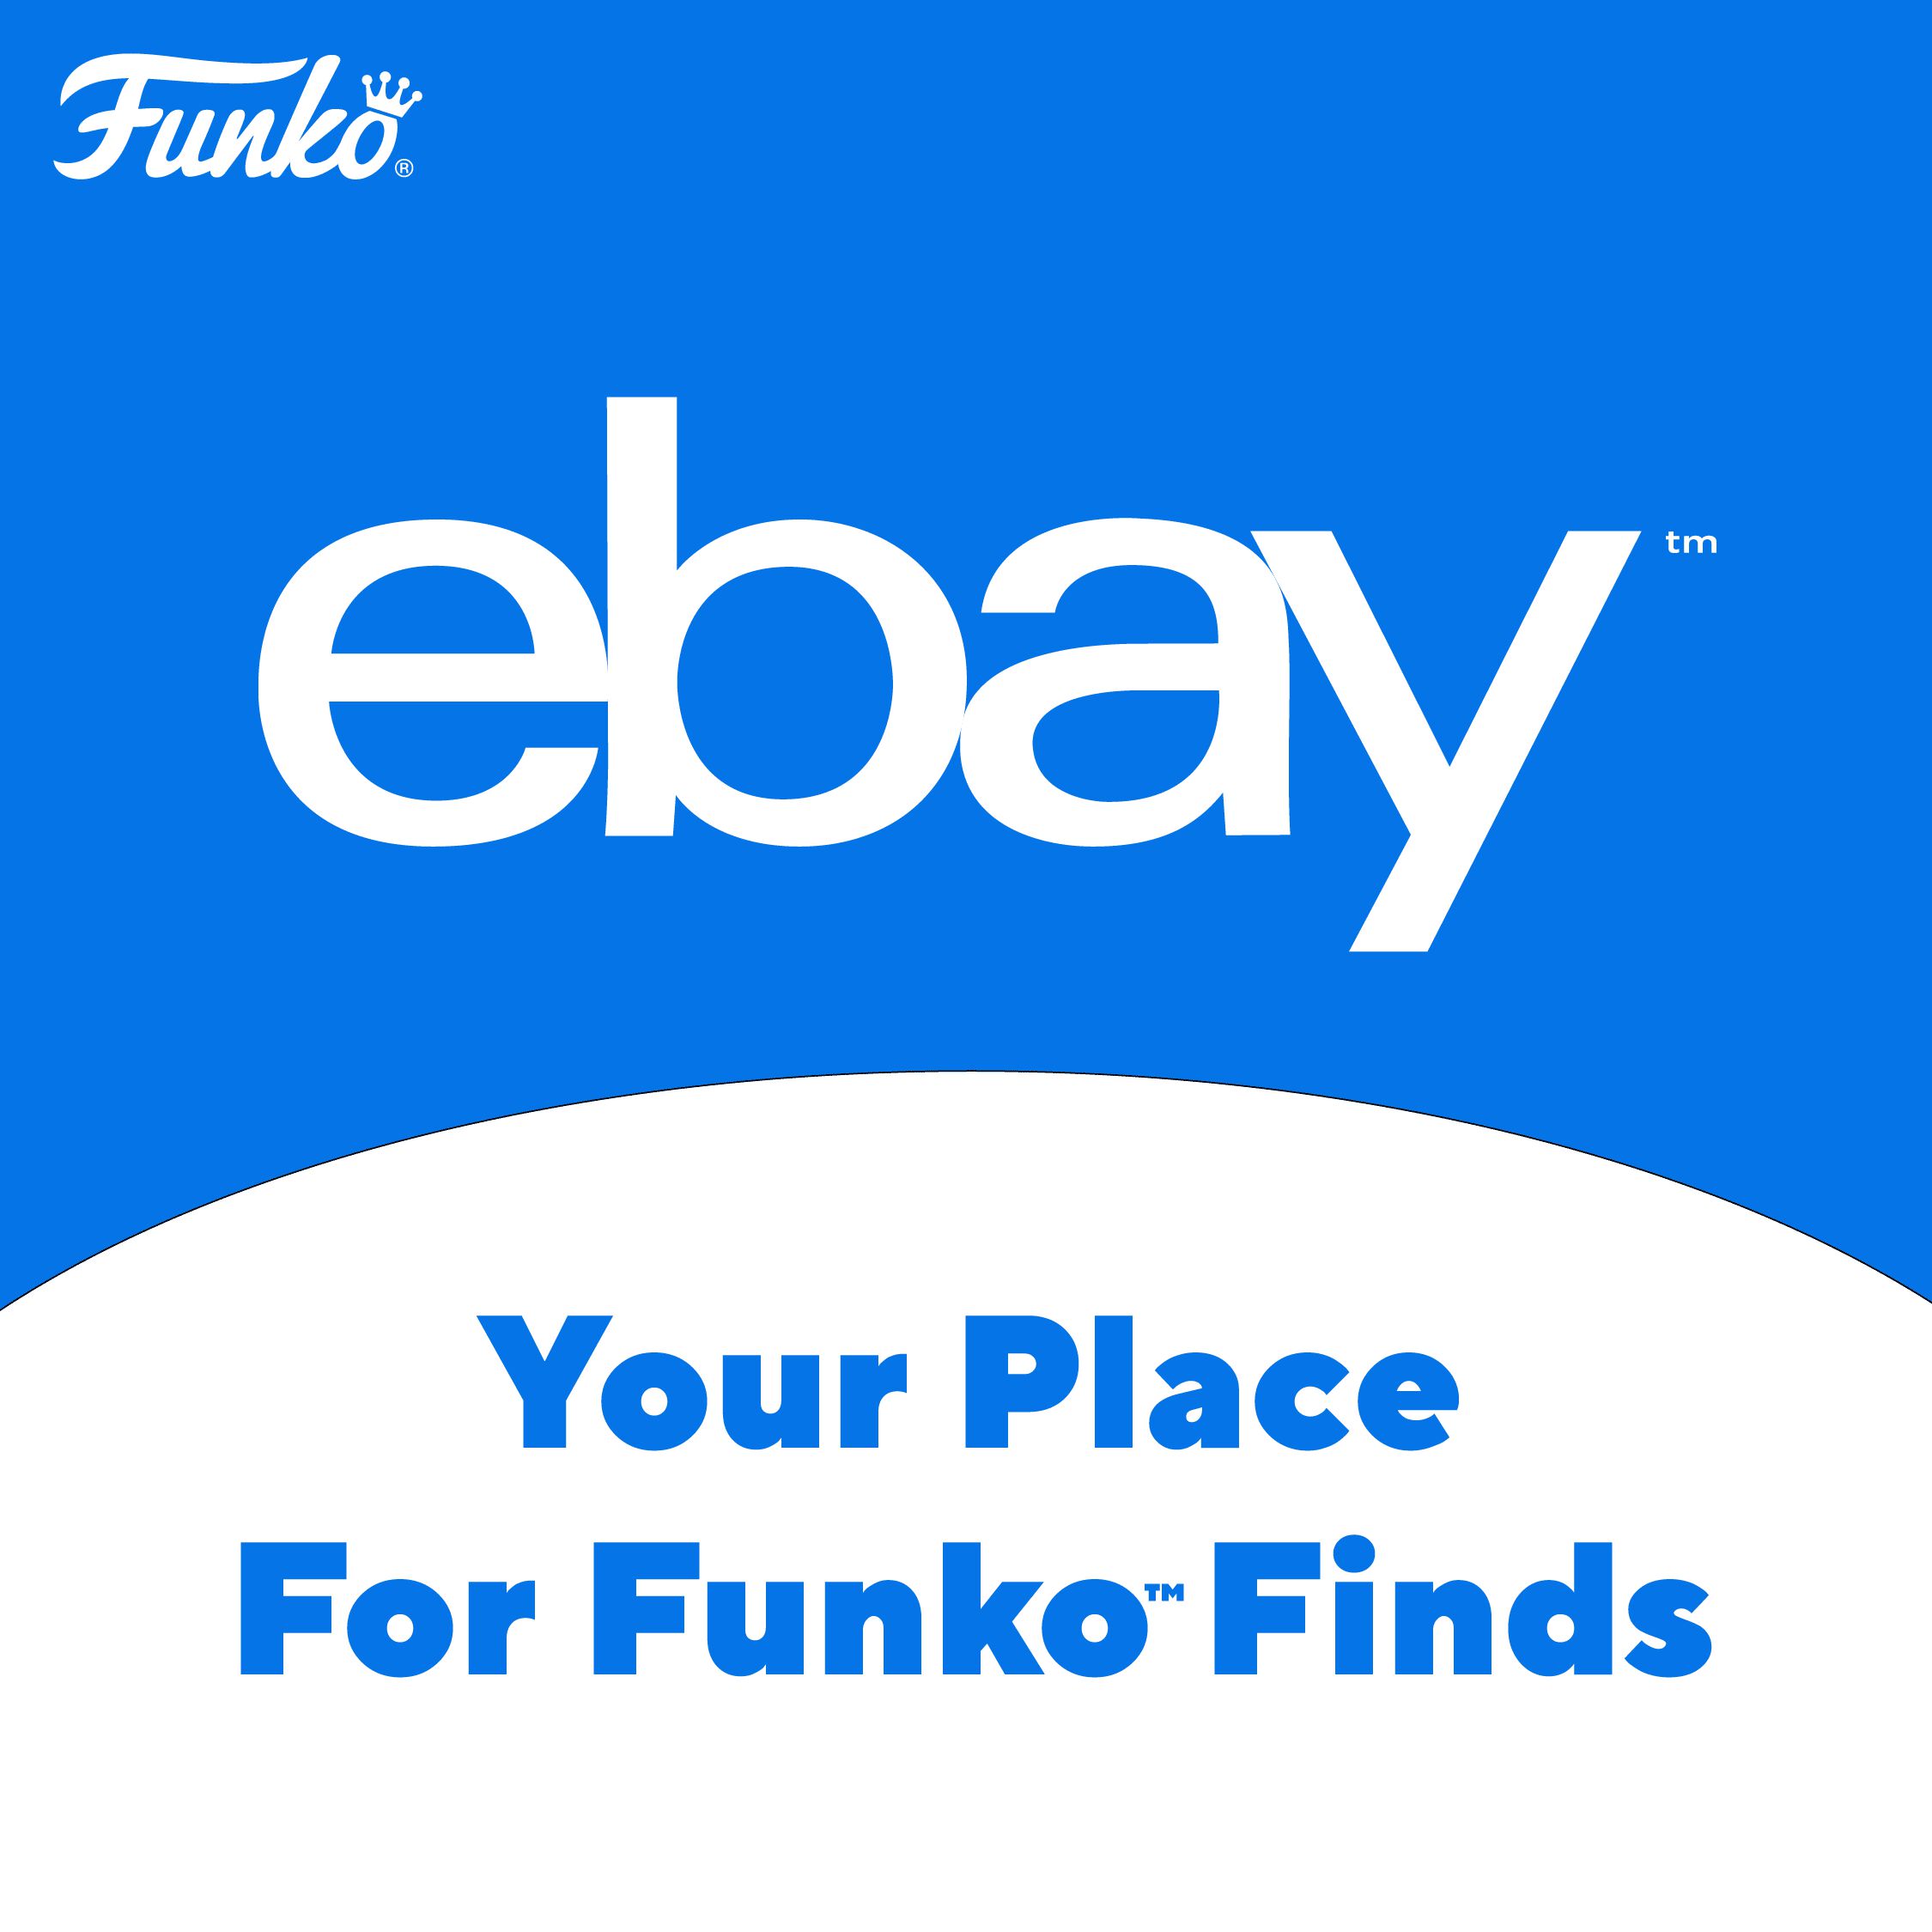 Funko x eBay - New Exclusive Products & Perks for Collectors